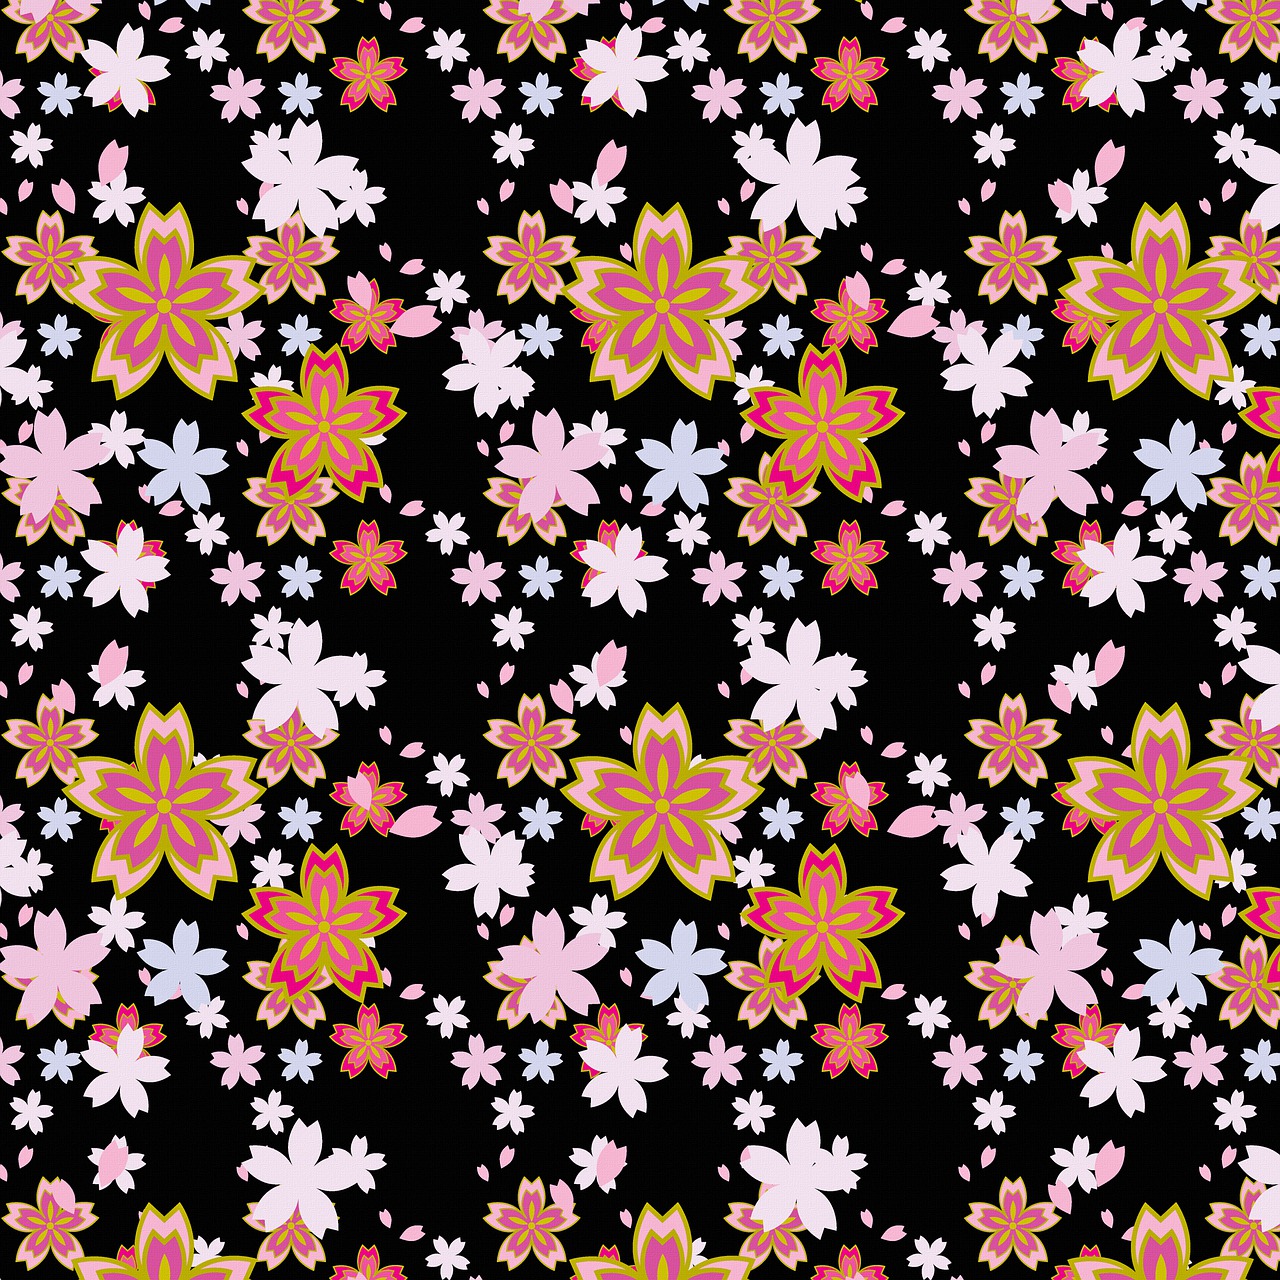 a pattern of pink and white flowers on a black background, vector art, sōsaku hanga, seasons!! : 🌸 ☀ 🍂 ❄, pink orange flowers, many small details, seamless texture